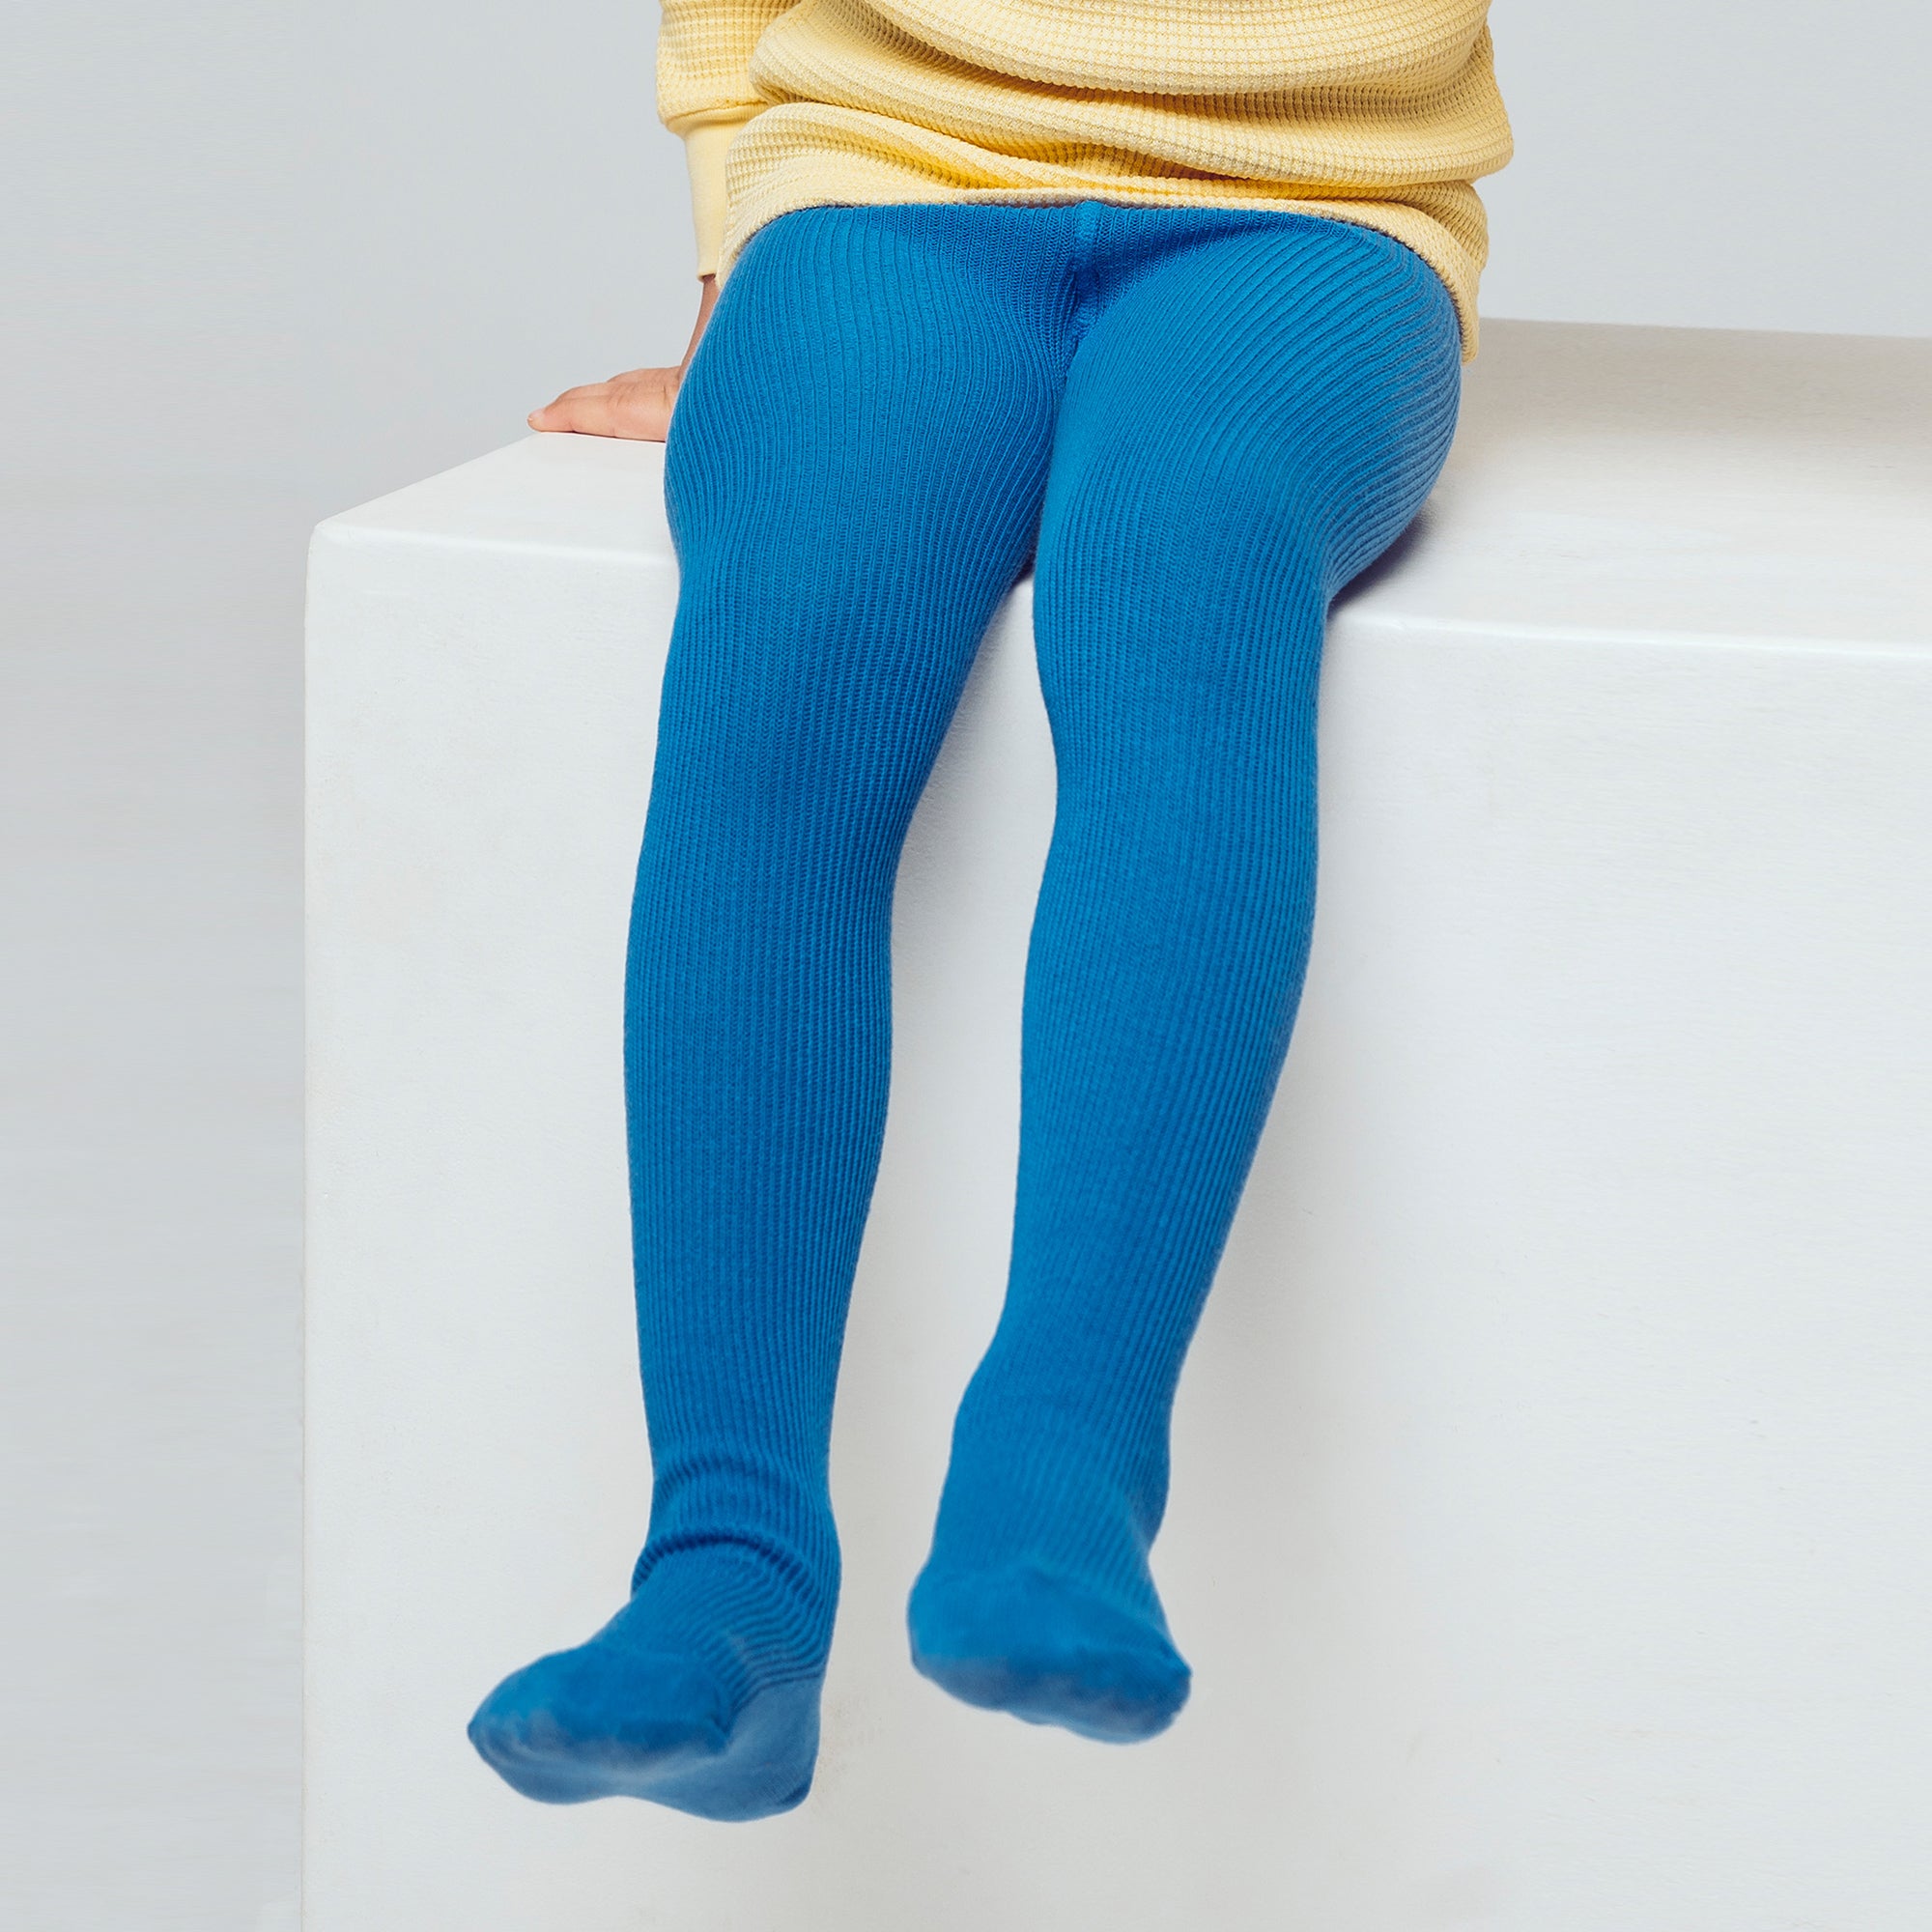 Blue Tights & Stockings for Women 